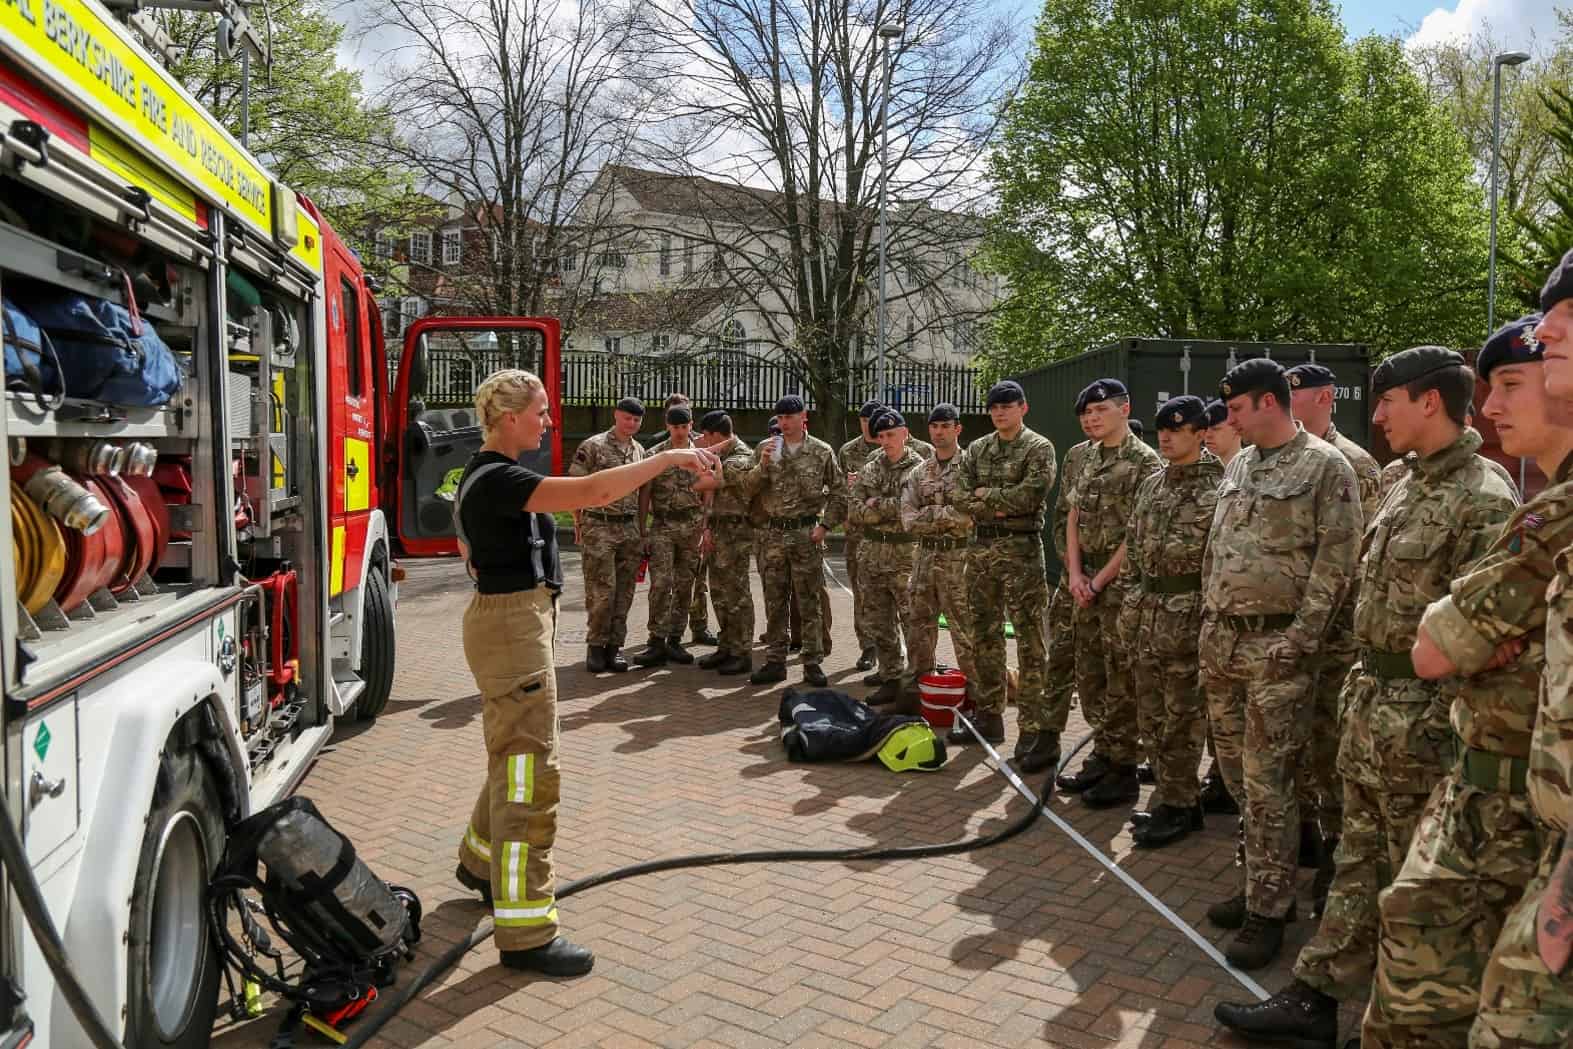 A firefighter talking with several soldiers.